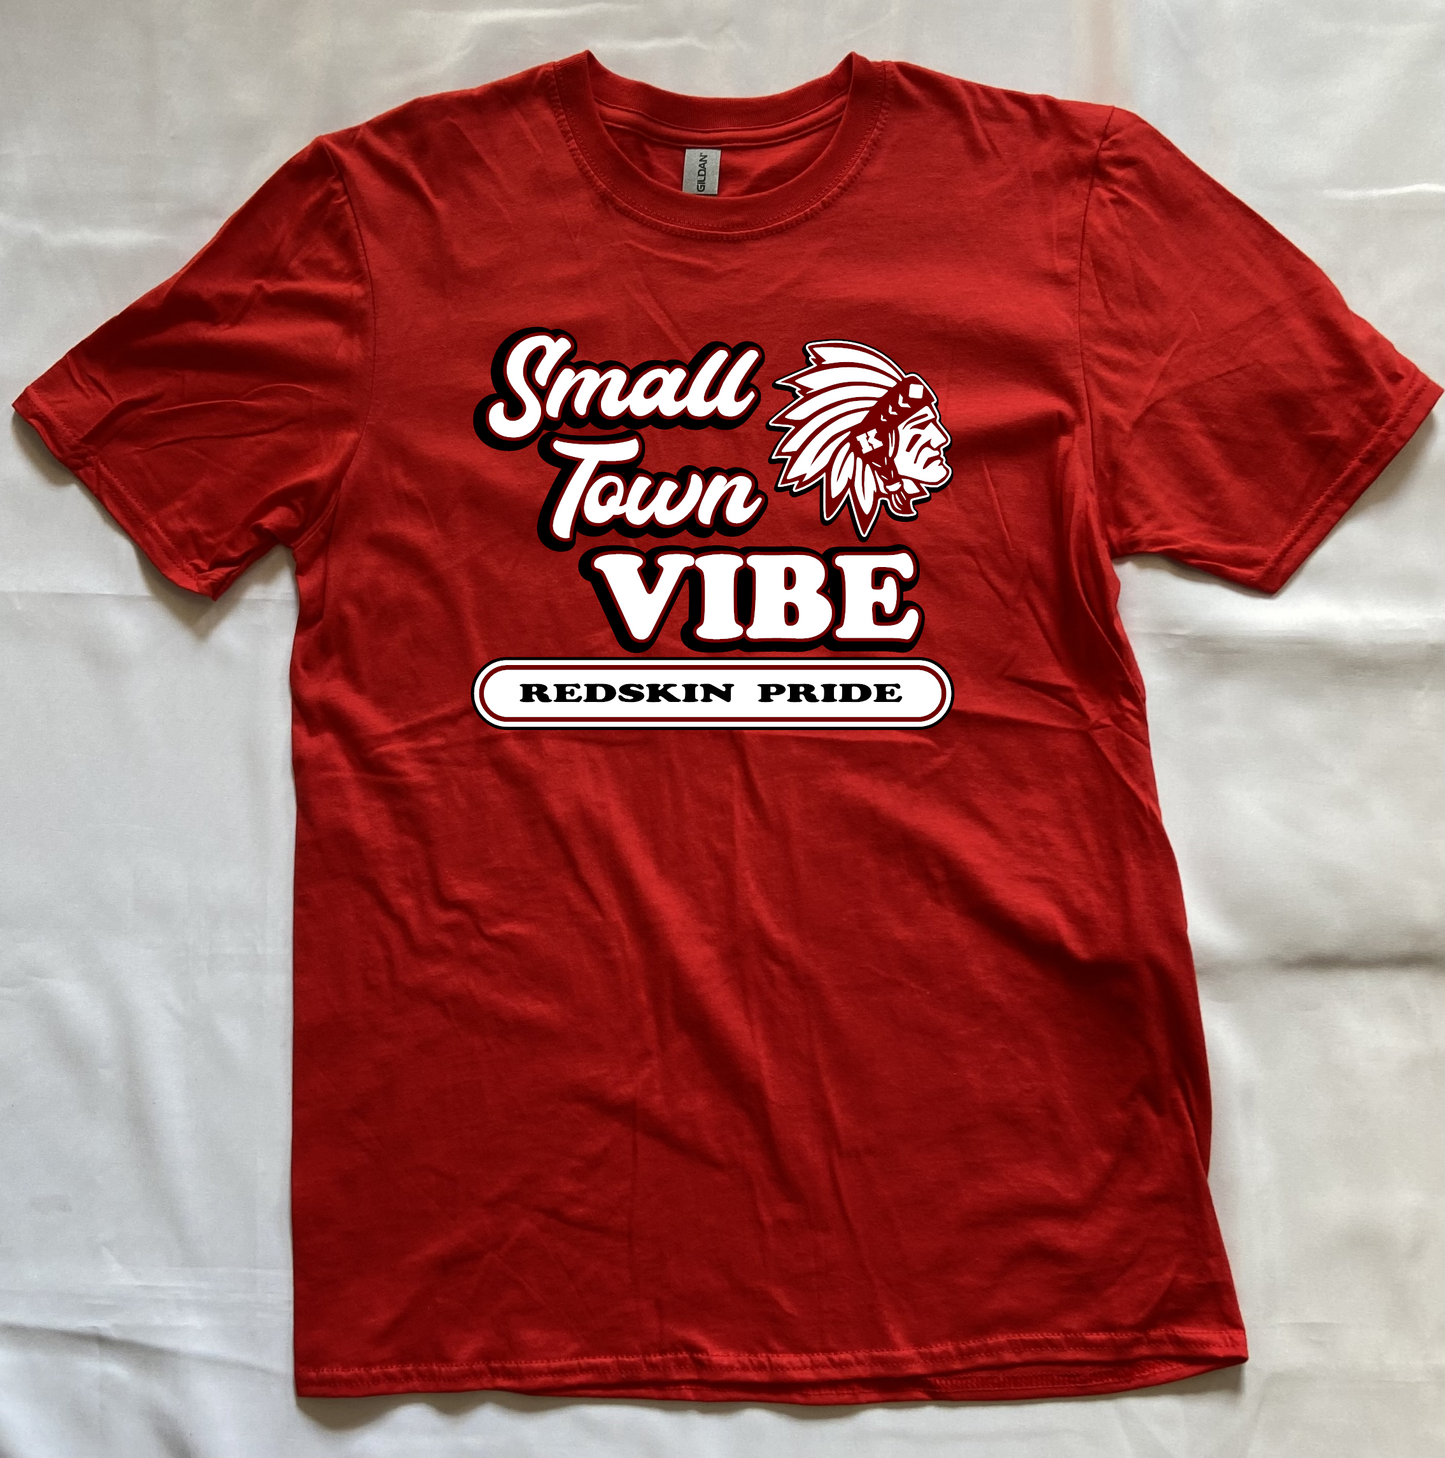 Small Town Vibe Redskin Pride T-shirt - Red - Knox Redskins